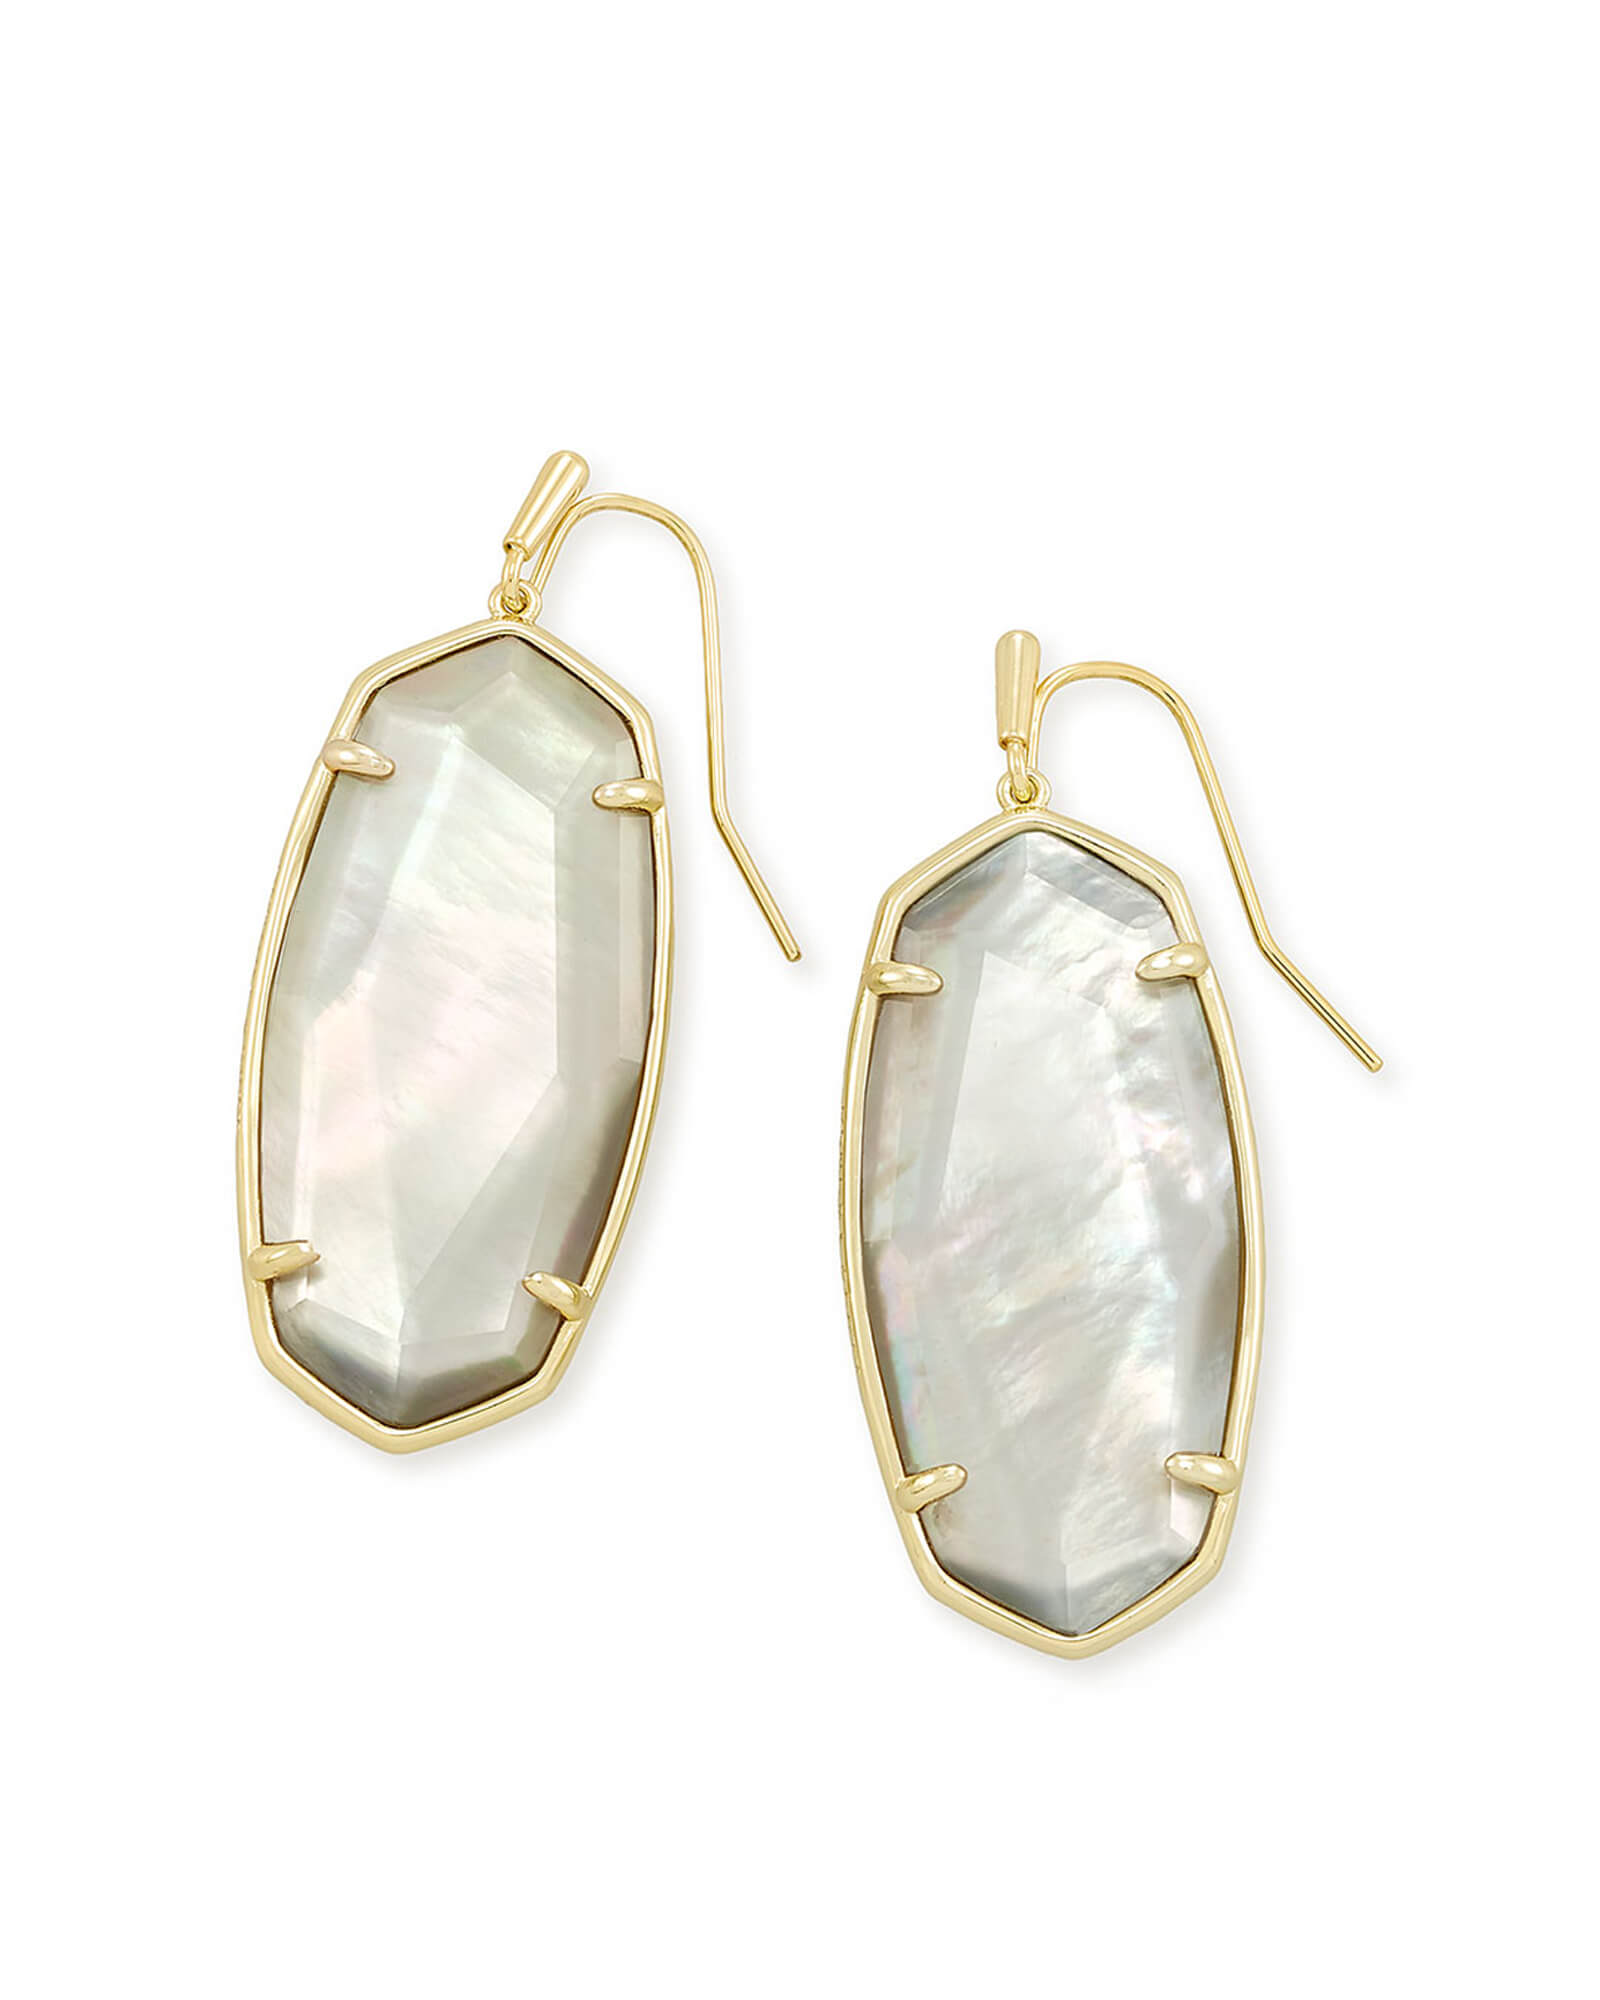 Kendra Scott Faceted Elle Gold Drop Earrings in Gray Illusion | Glass/Mother Of Pearl